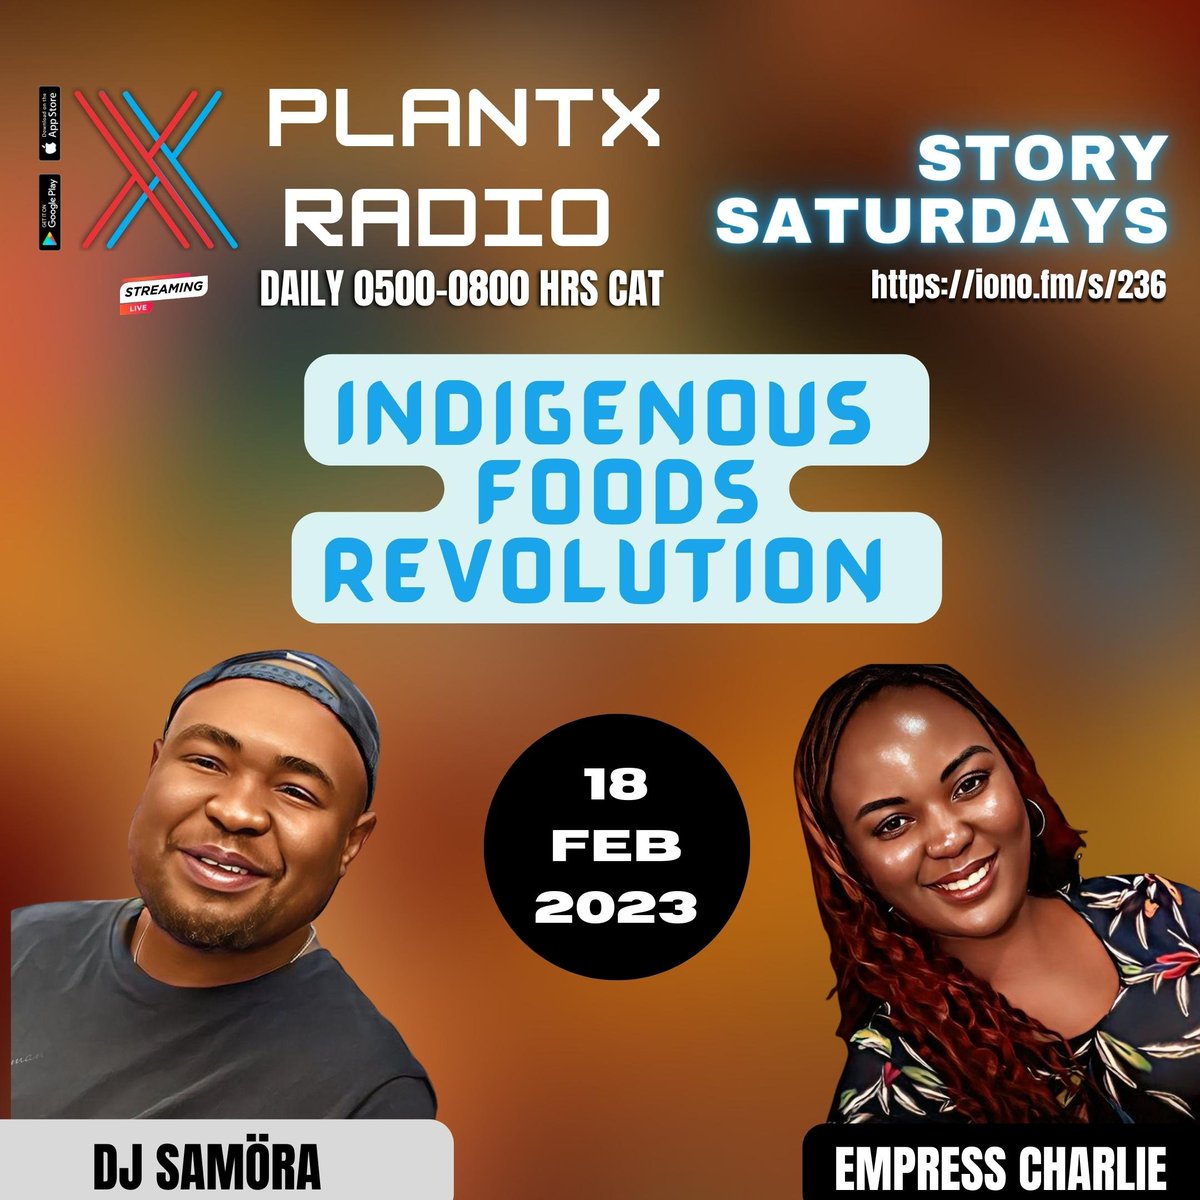 On Story Saturdays we connect with Empress Charlie to talk about the dynamics and changes towards African indigenous foods, from preparation to presentation and a return thereto. Its PlantX Radio on Story SaturdayS #indigenousfood #plants #Radiotalk